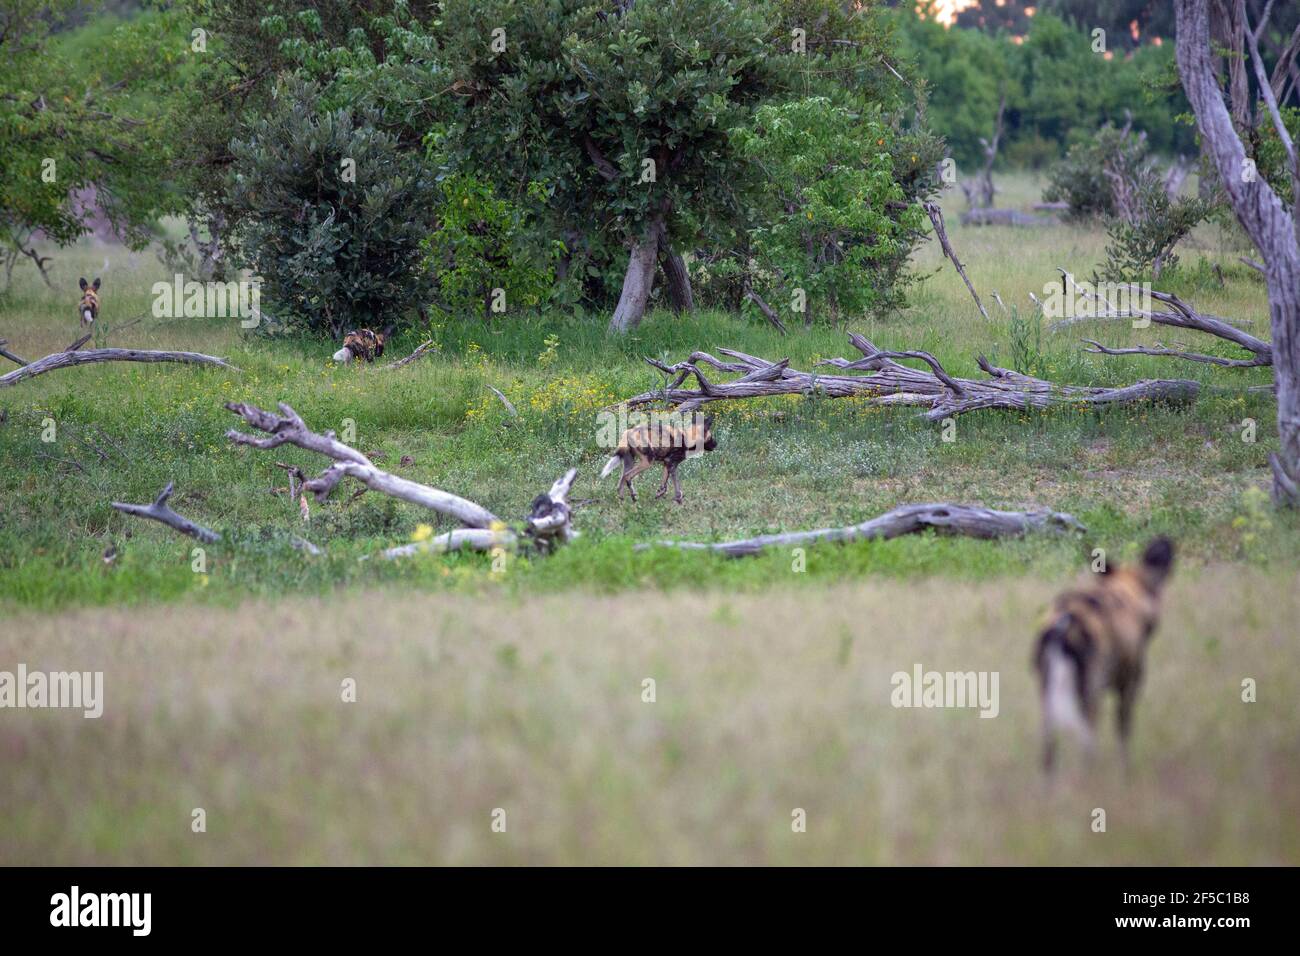 African Hunting Dogs, Painted Wolves (Lycaon pictus), front line positions as pack begins an approach to, but not visible, prey animals of Impala. Stock Photo